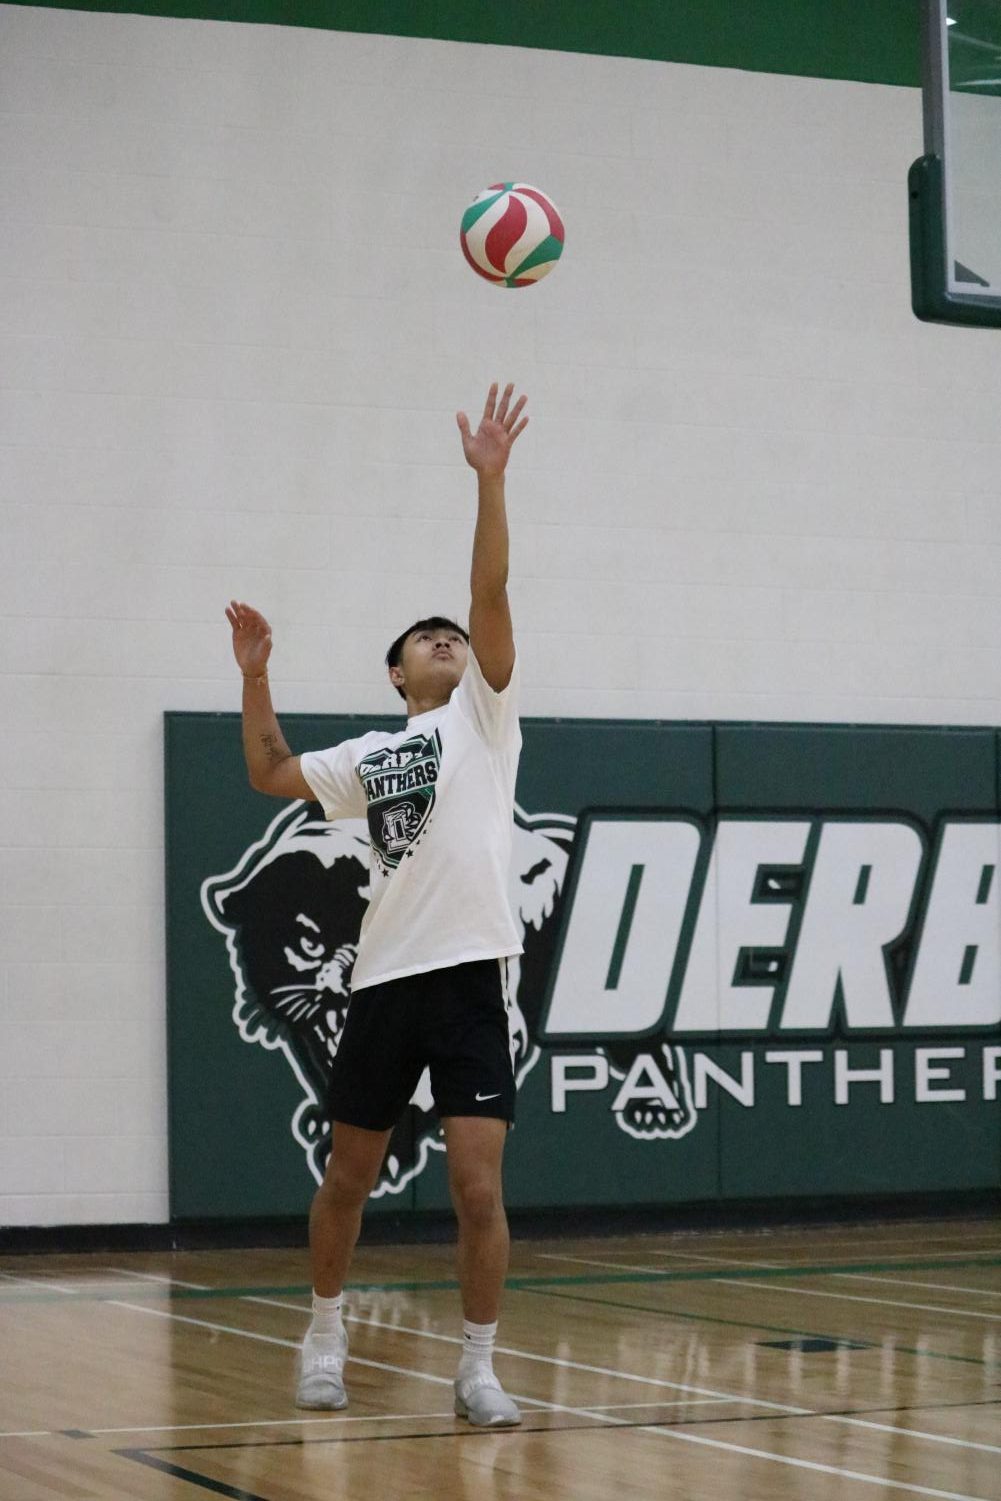 Derby+v.+Southeast+boys+volleyball+scrimmage+%28photos+by+Alyssa+Lai%29